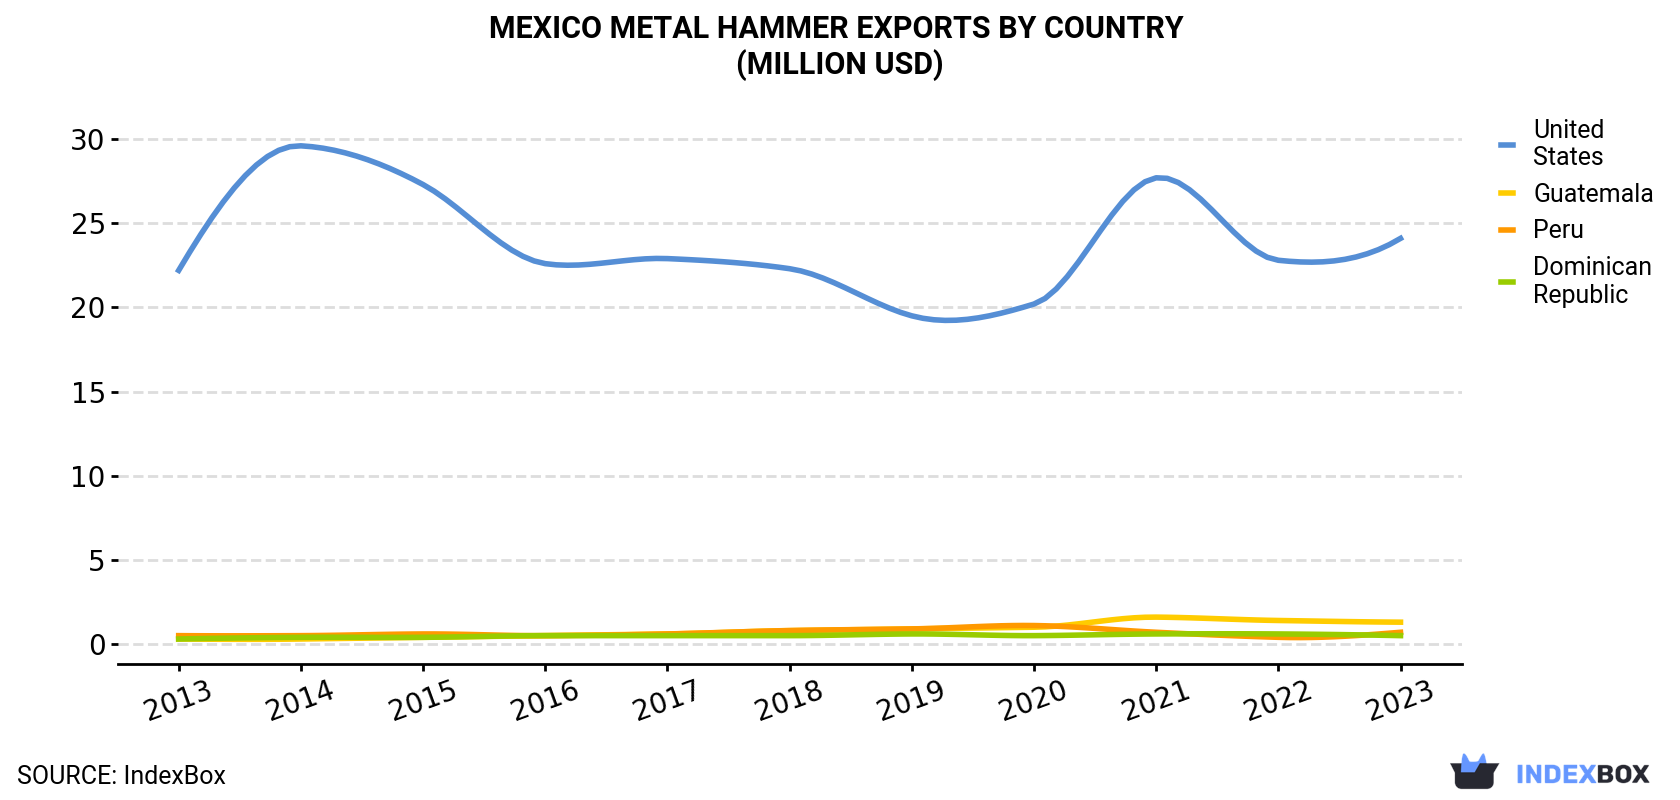 Mexico Metal Hammer Exports By Country (Million USD)